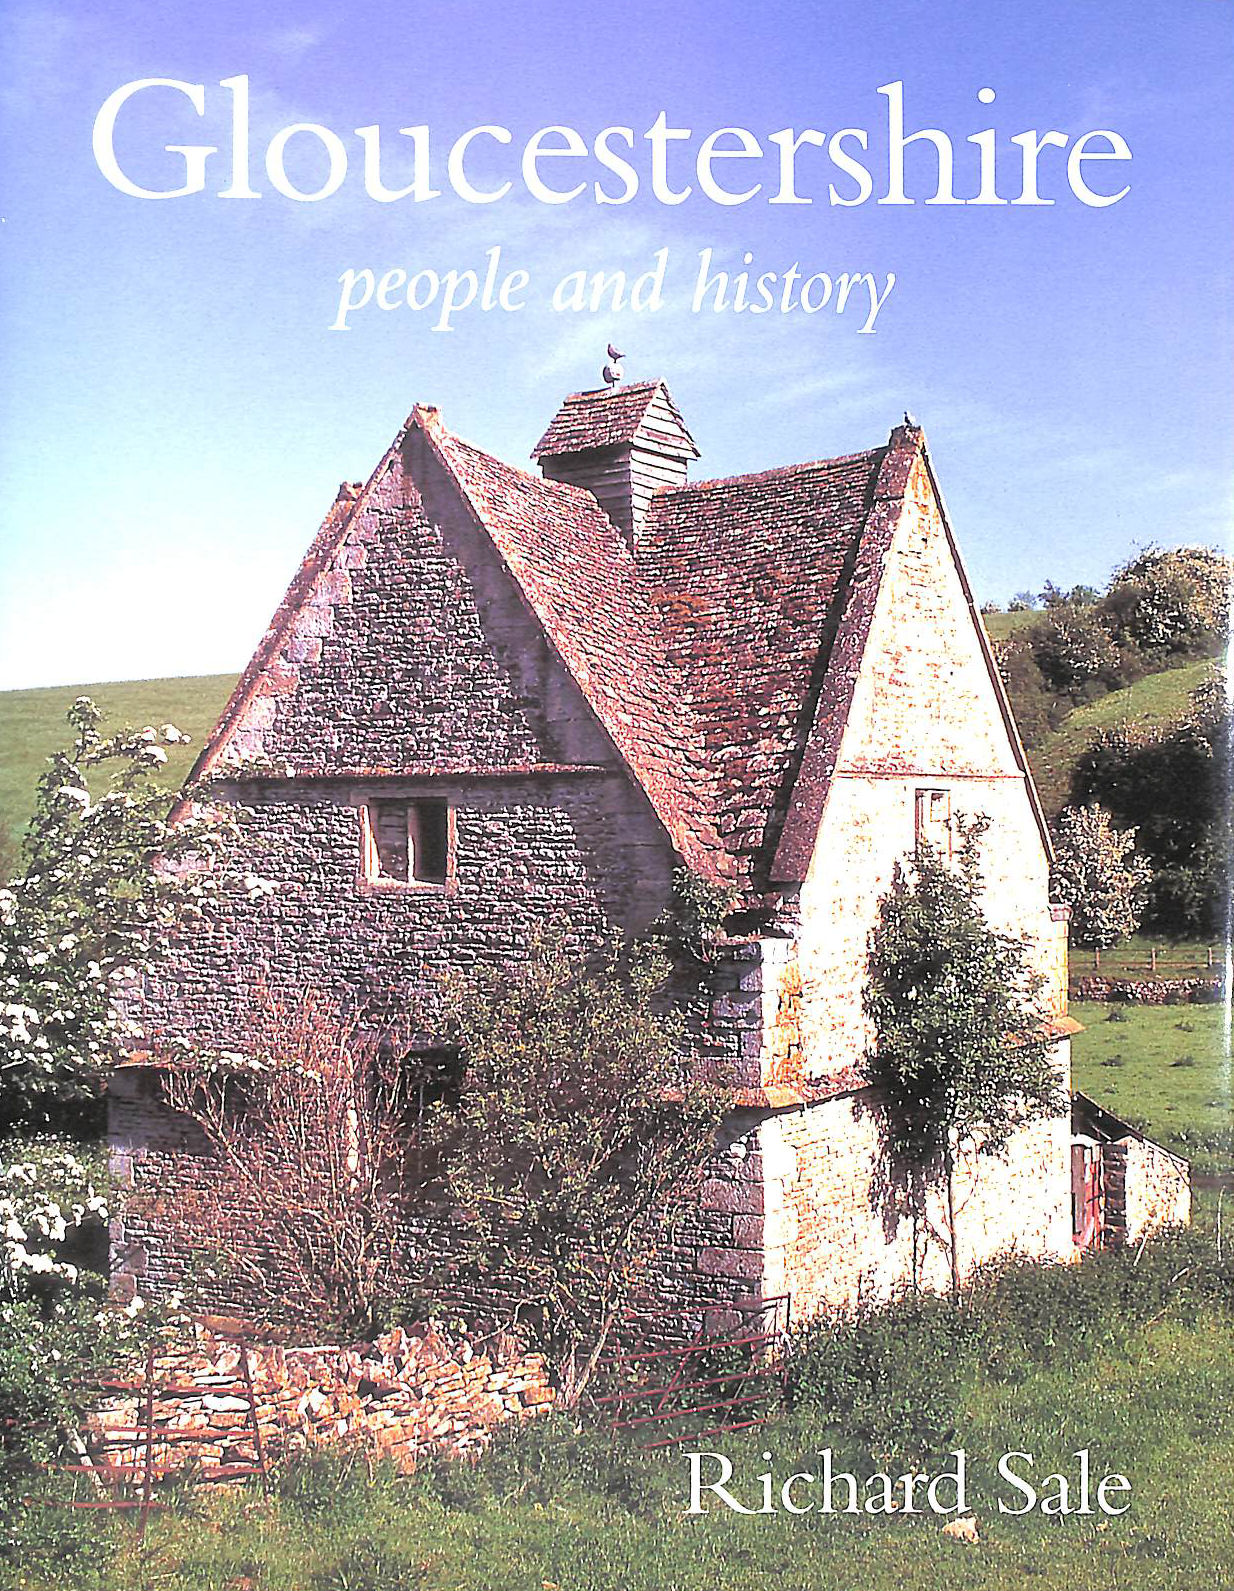 SALE, RICHARD - Gloucestershire: People and History